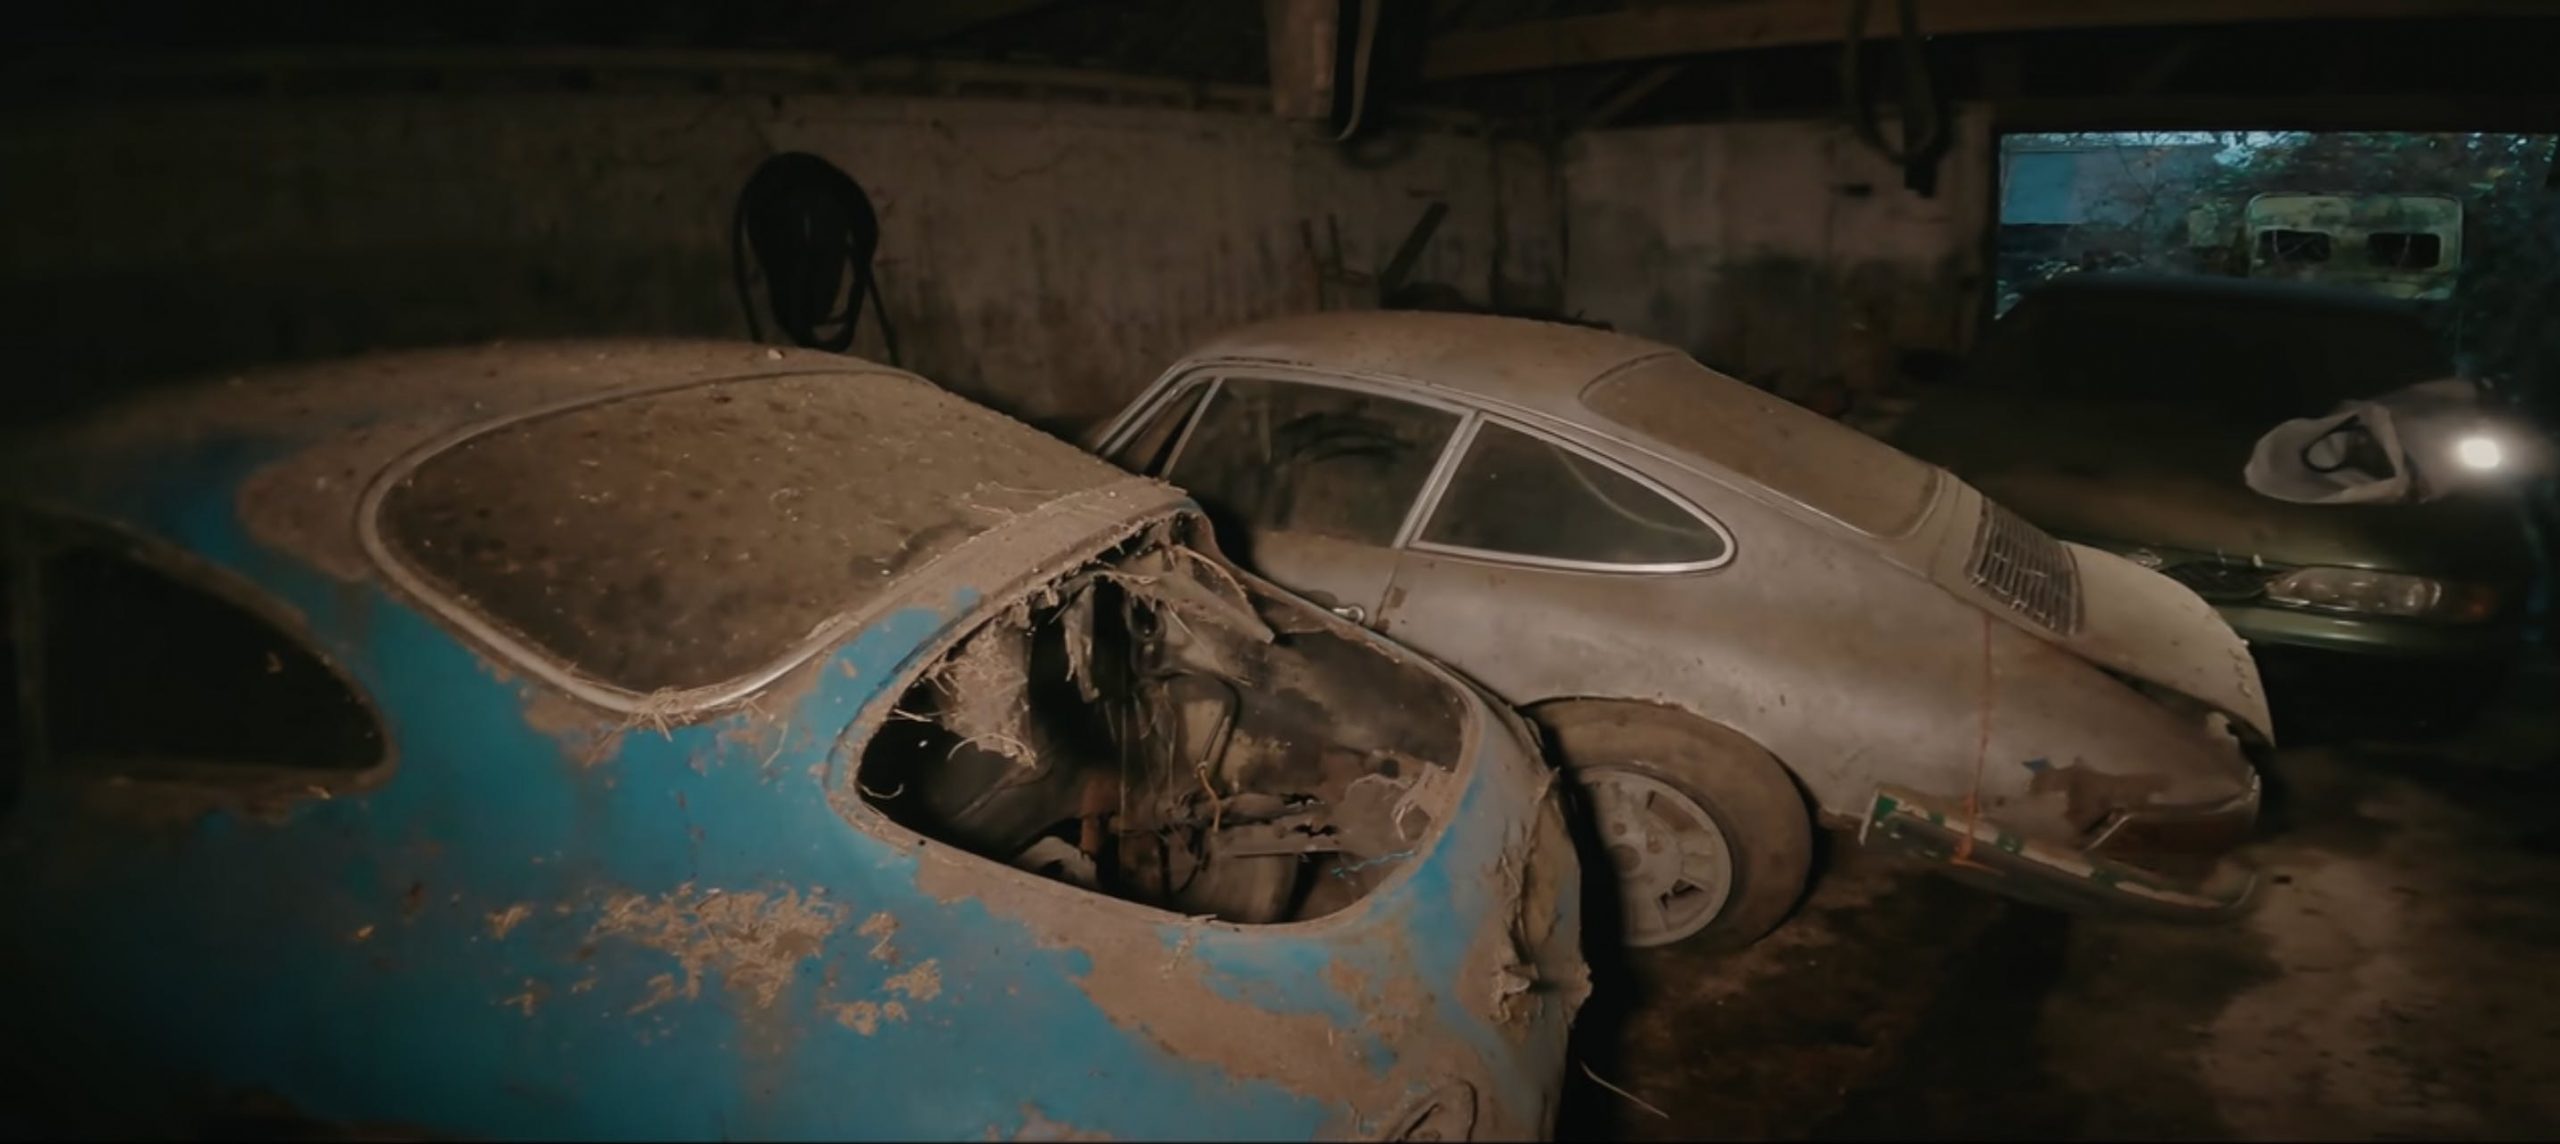 This barn find packs tons of cool cars, but we have questions